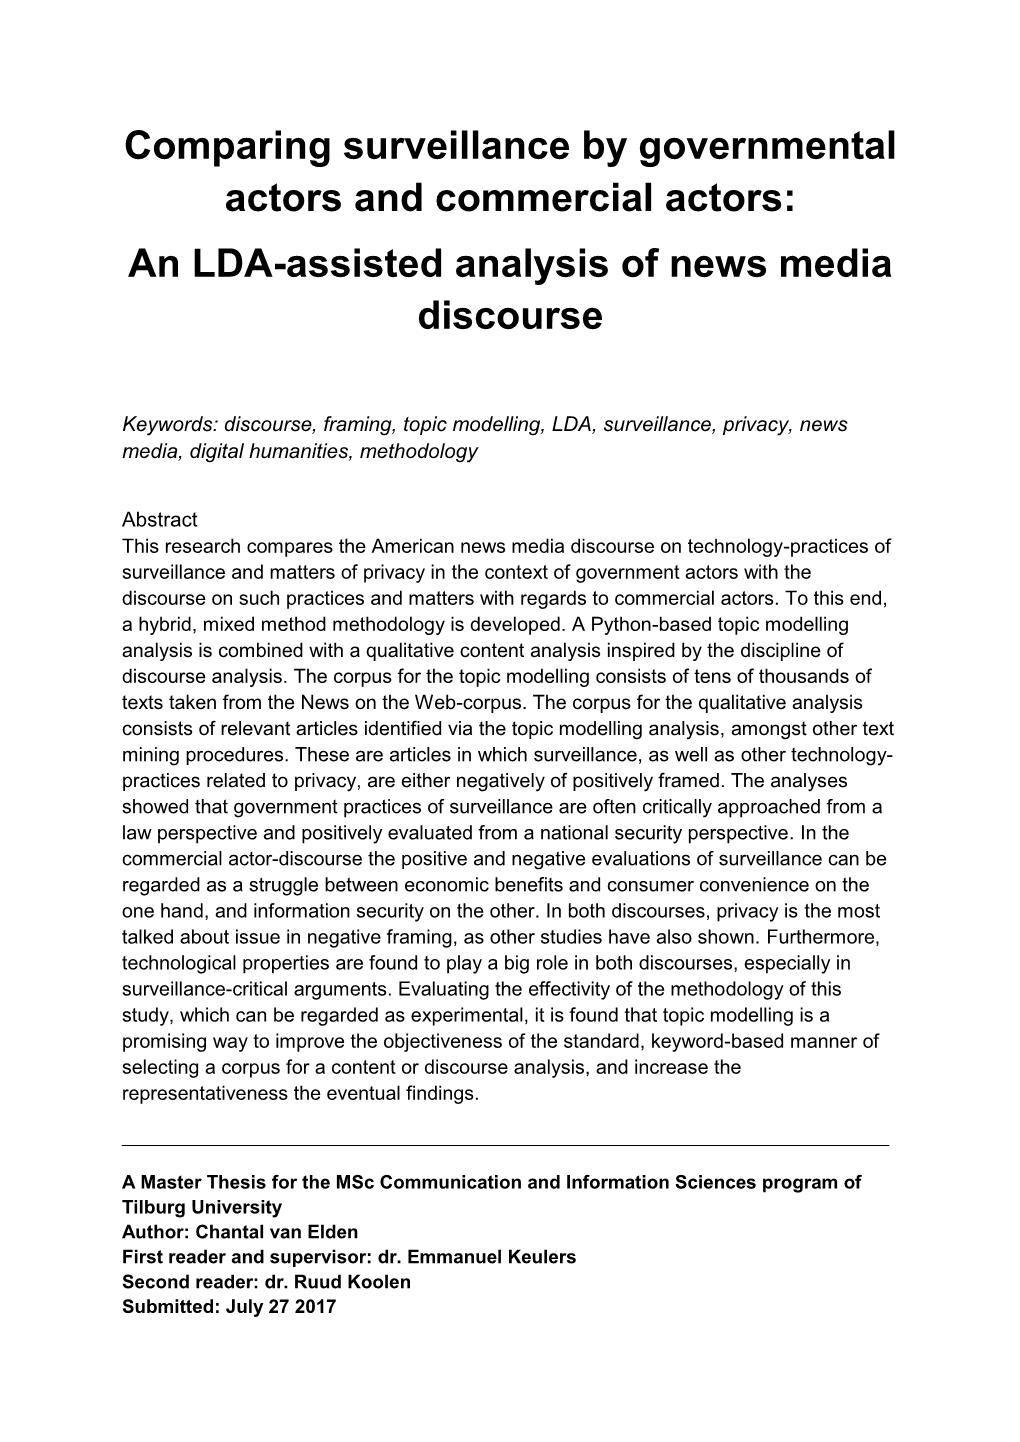 Comparing Surveillance by Governmental Actors and Commercial Actors: an LDA-Assisted Analysis of News Media Discourse